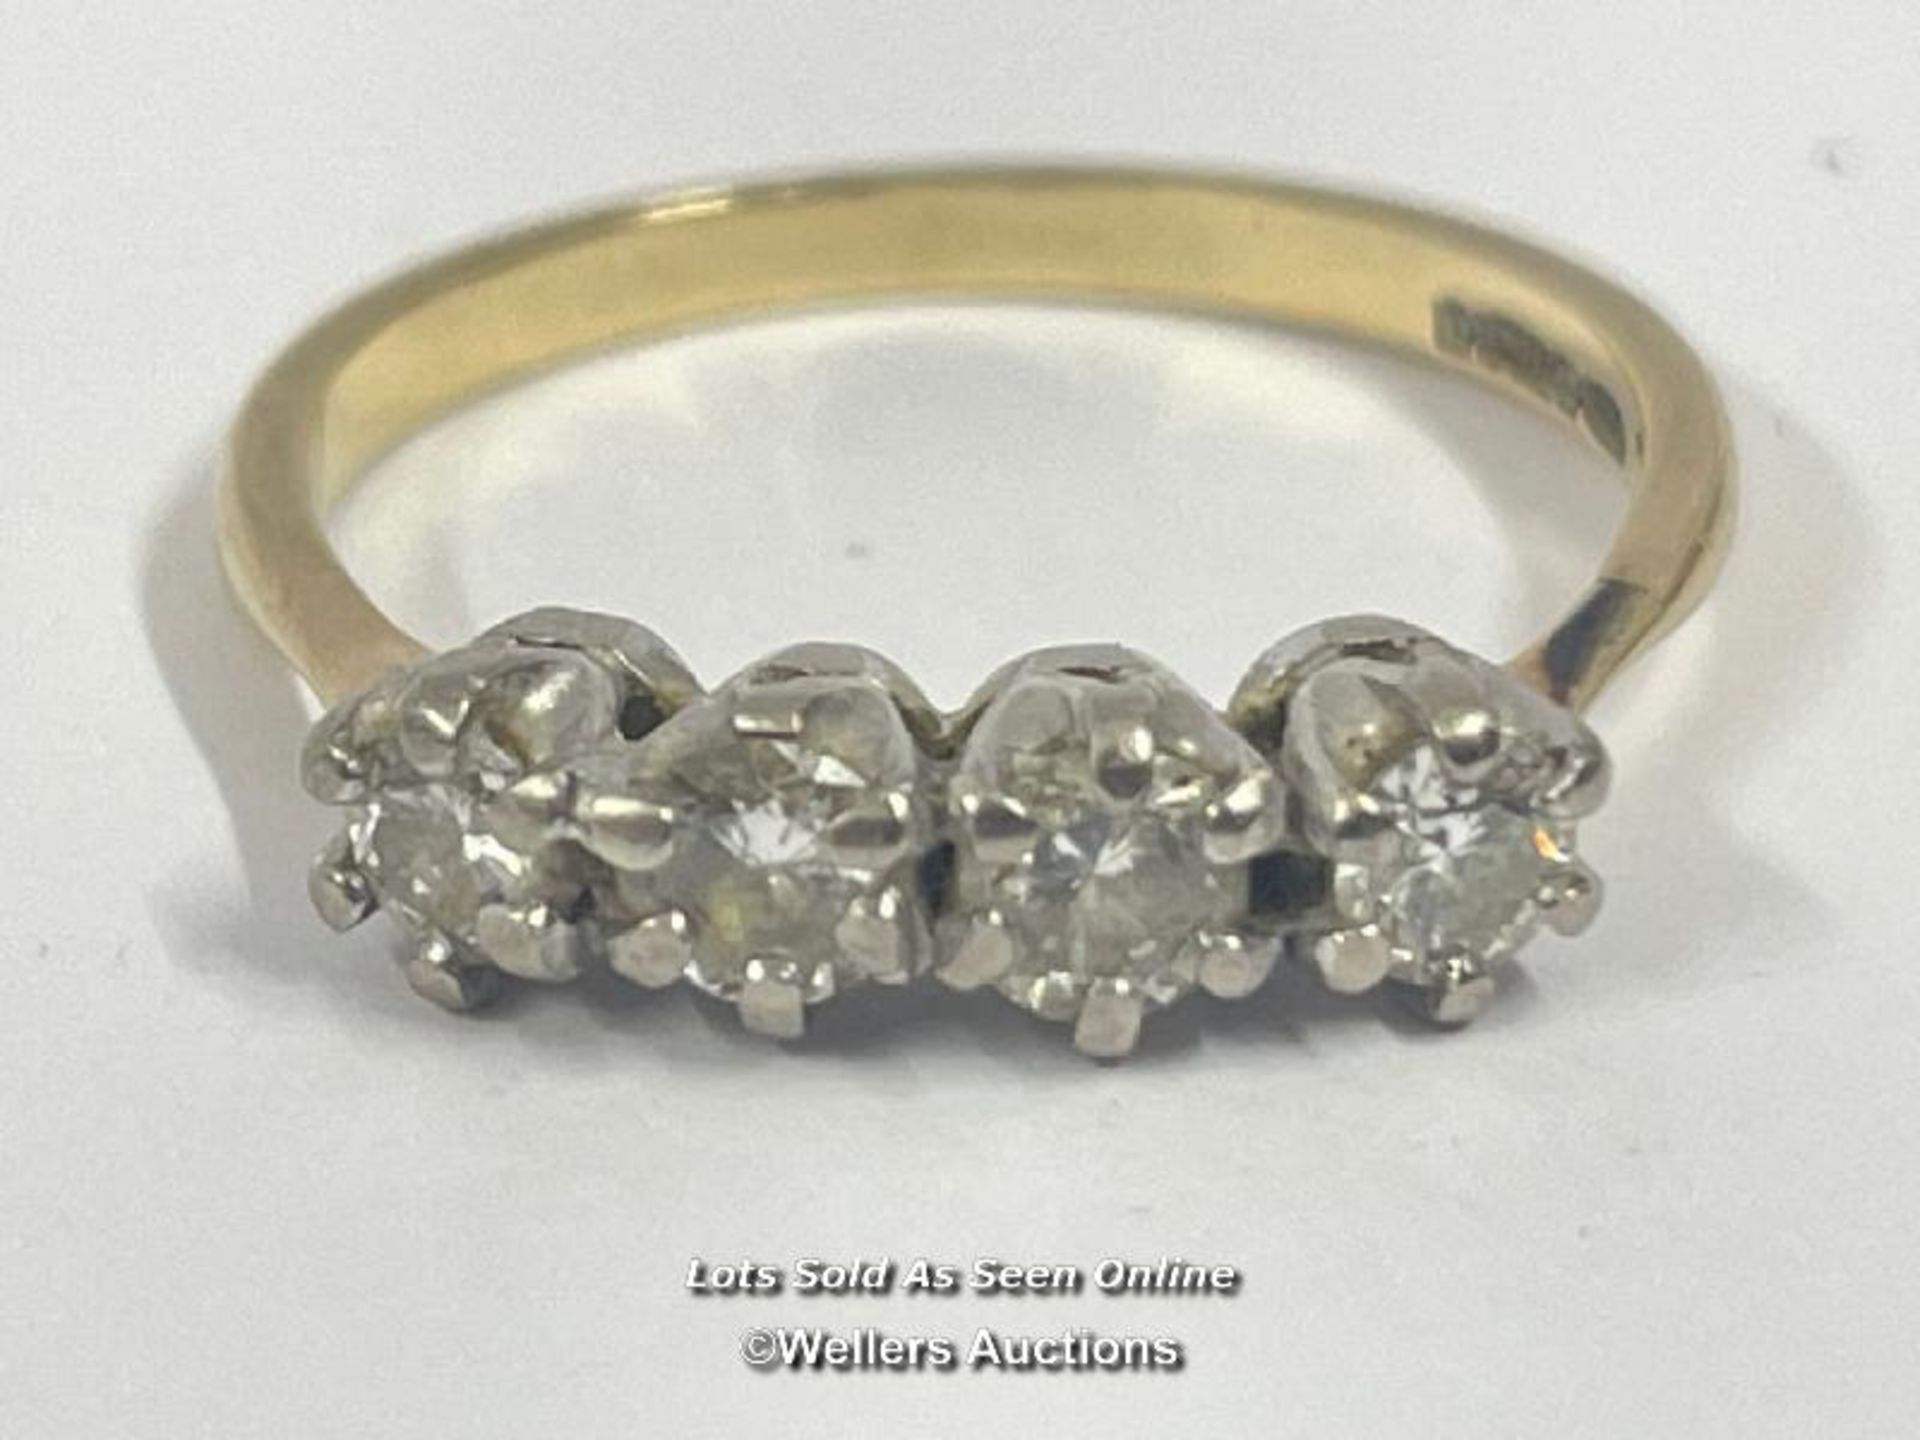 FOUR STONE DIAMOND RING IN HALLMARKED 9CT GOLD. ESTIMATED DIAMOND WEIGHT 0.45CT, RING SIZE L 1/2, - Image 2 of 4